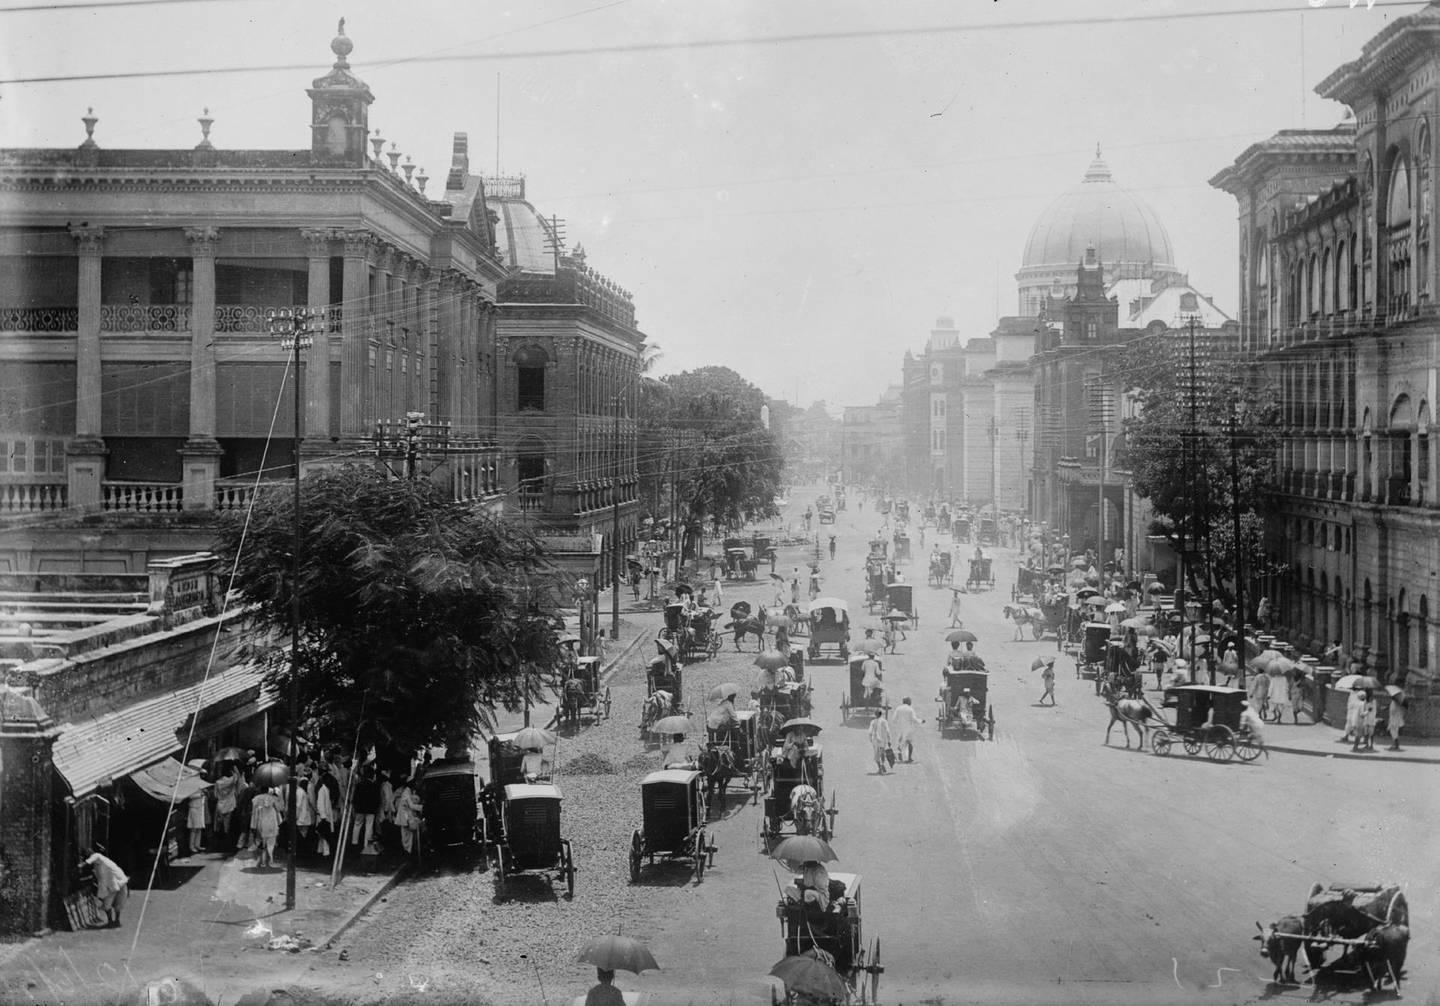 European Quarter, Calcutta, India, 1922. (Photo by: Universal History Archive/UIG via Getty Images)